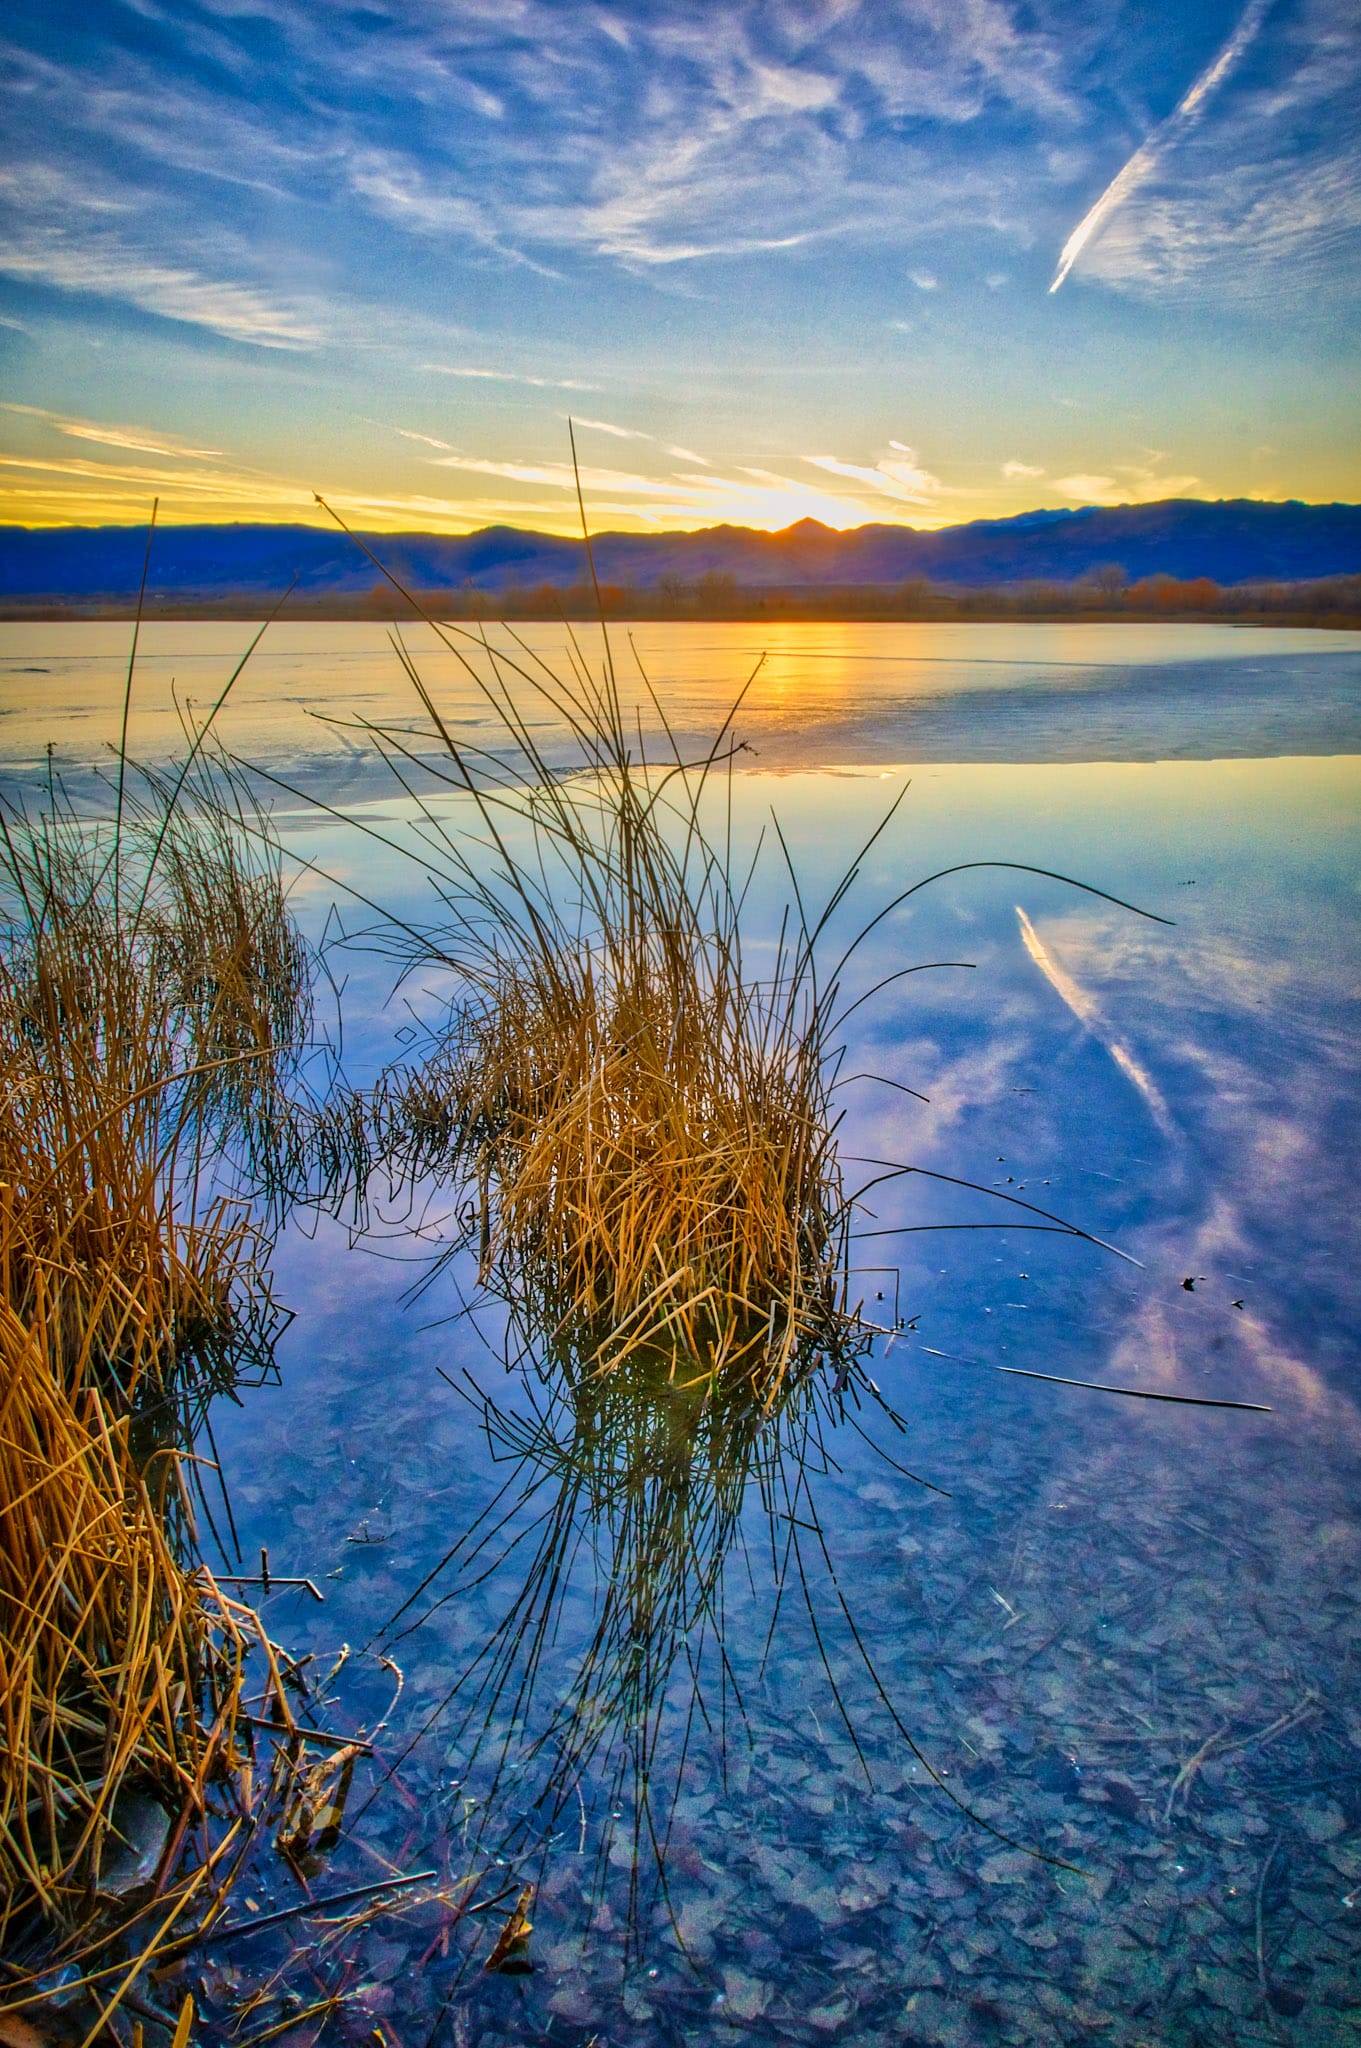 As the sun sets along the Front Range of Colorado, clouds and grasses are reflected in the still waters of one of the ponds at Walden Ponds Wildlife Habitat in Boulder Colorado.